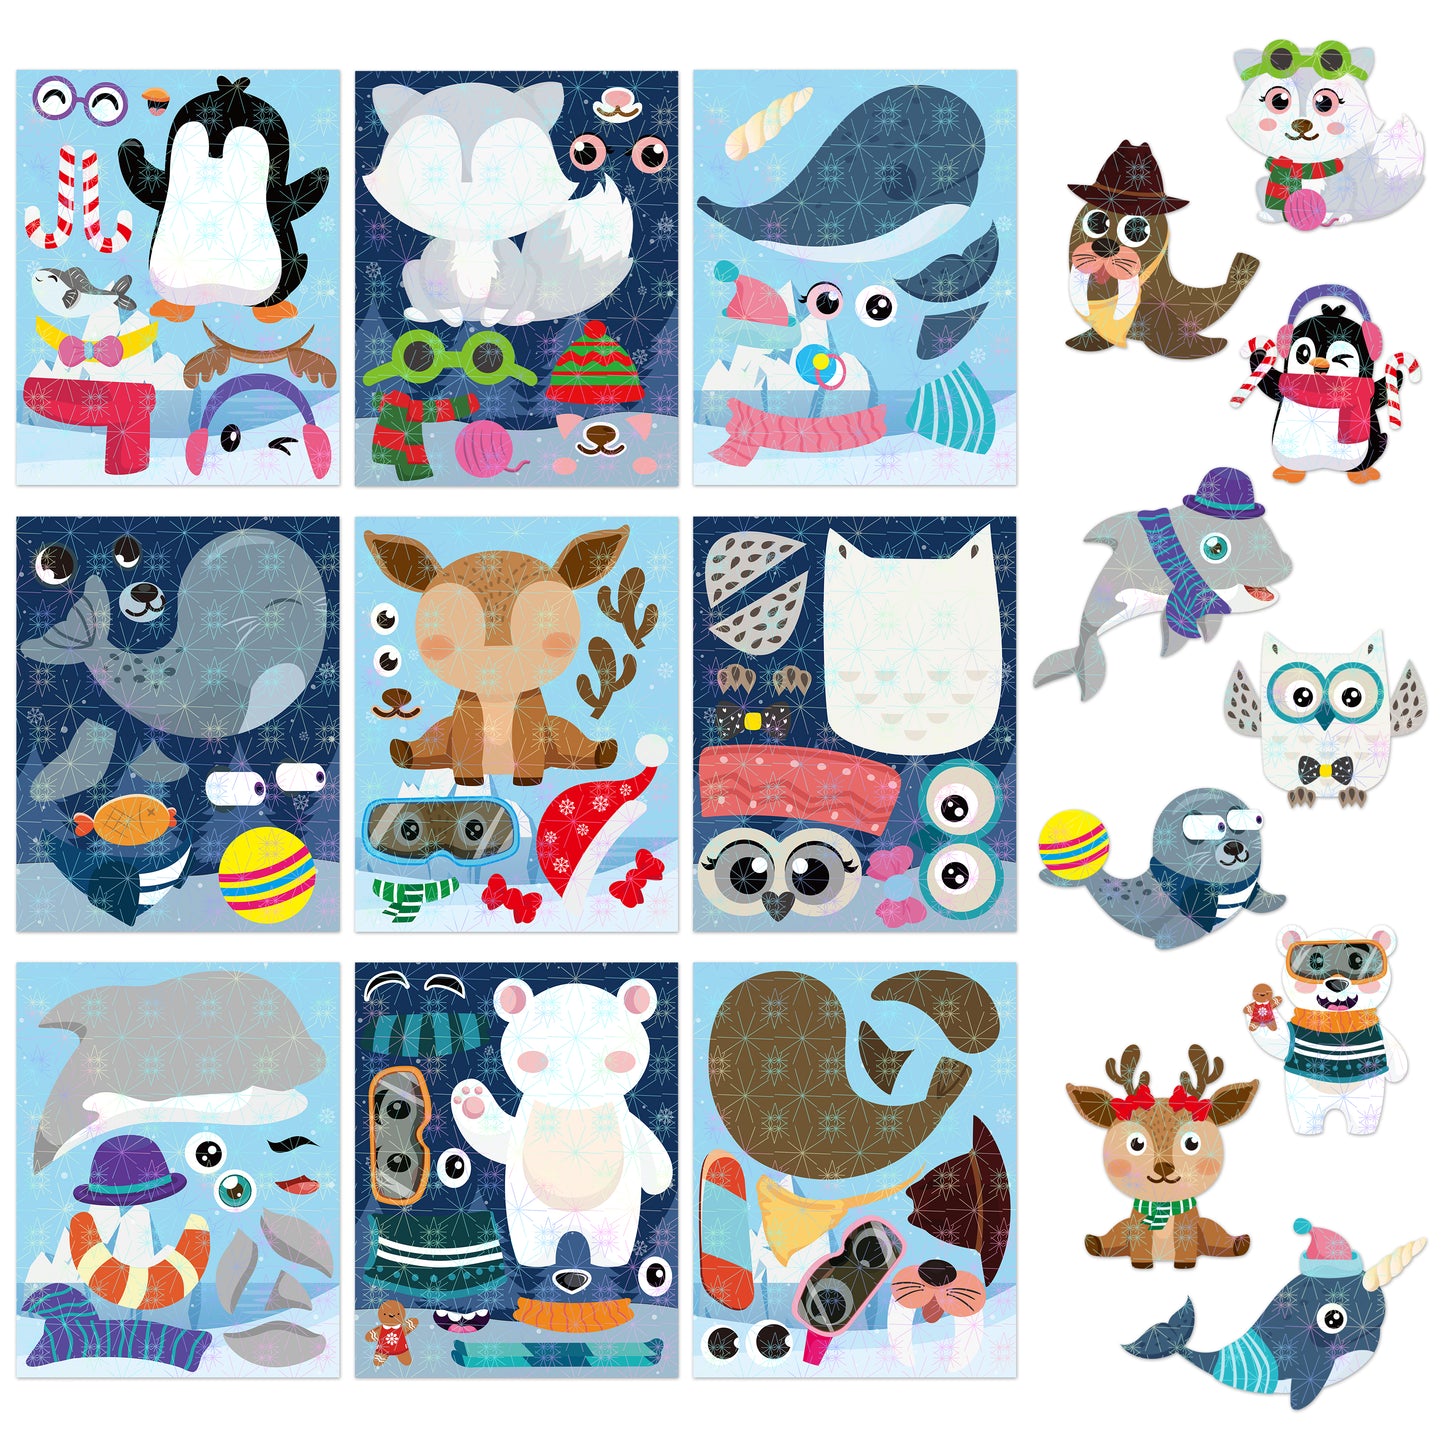 HubirdSall 45Pcs Polar Animals Make-a-Face Holographic Sticker Make Your Own Arctic Animals Stickers Sheets with Polar Bear Snowy Arctic Fox Birthday Gift Party Favors Game School Activity for Kids